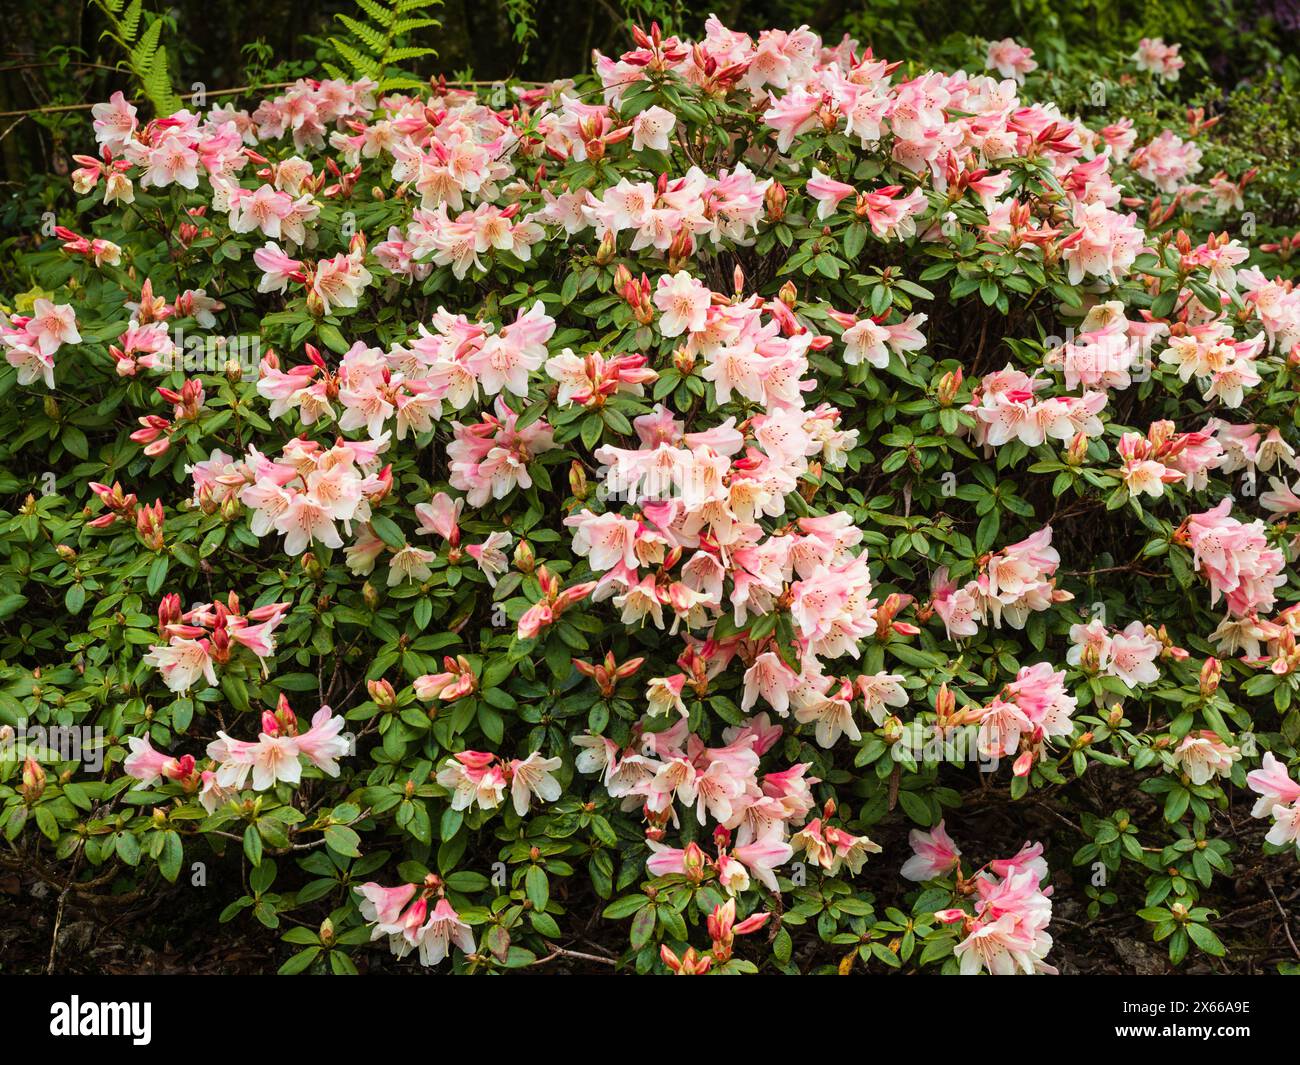 Bell shaped pink and white spring flowers of the hardy, compact evergreen shrub, Rhododendron 'Tree Creeper' Stock Photo